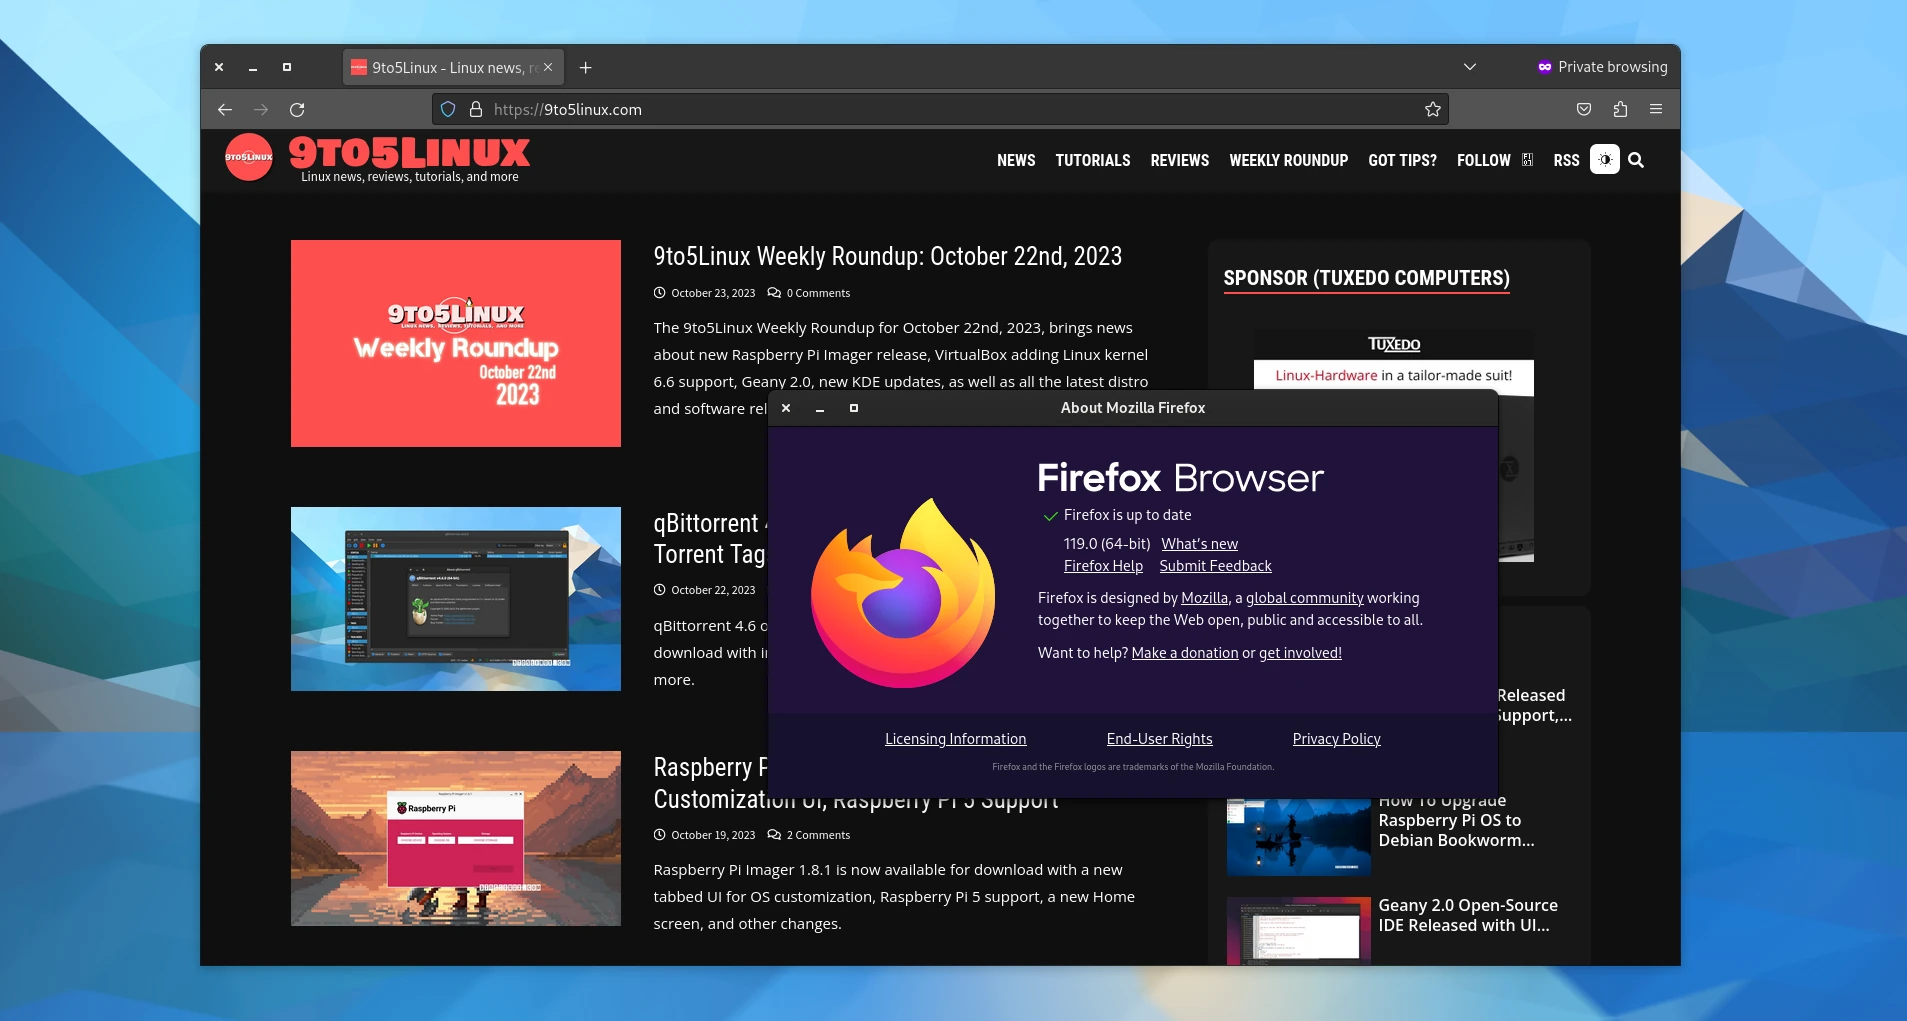 Mozilla Firefox 119 Is Now Available for Download, Here’s What’s New